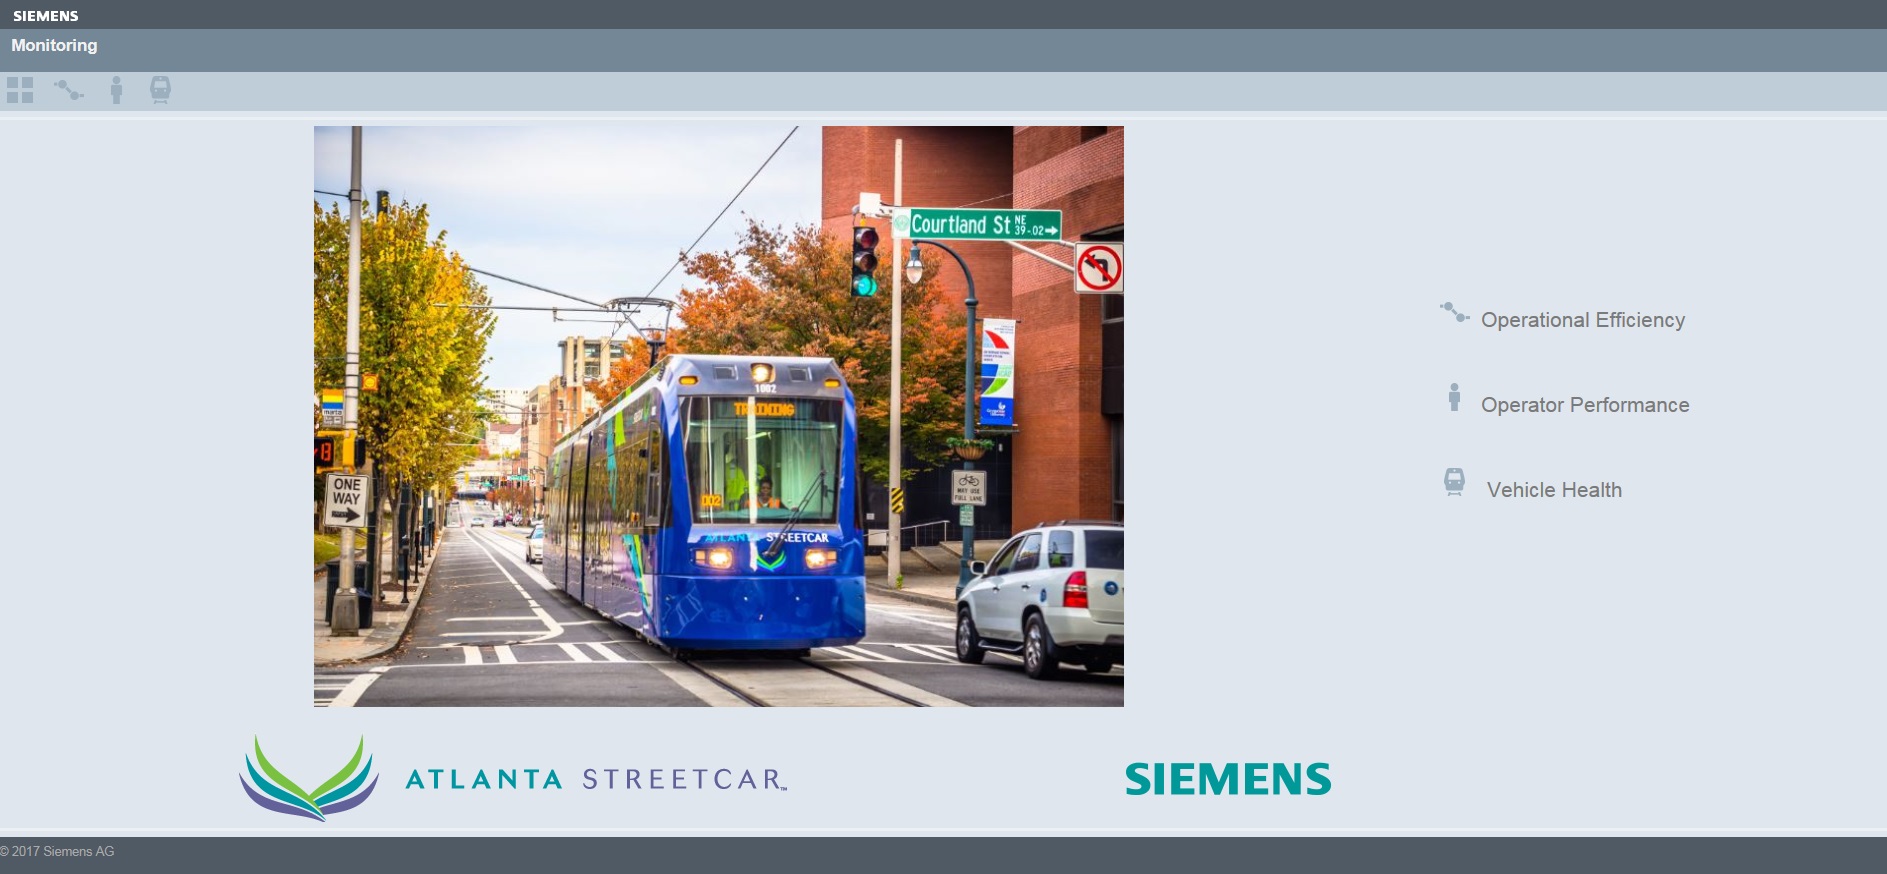 The Siemens Data Analytics and Applications Center will help transportation providers use big data to improve operations and safety. One project includes the Atlanta Streetcar. 